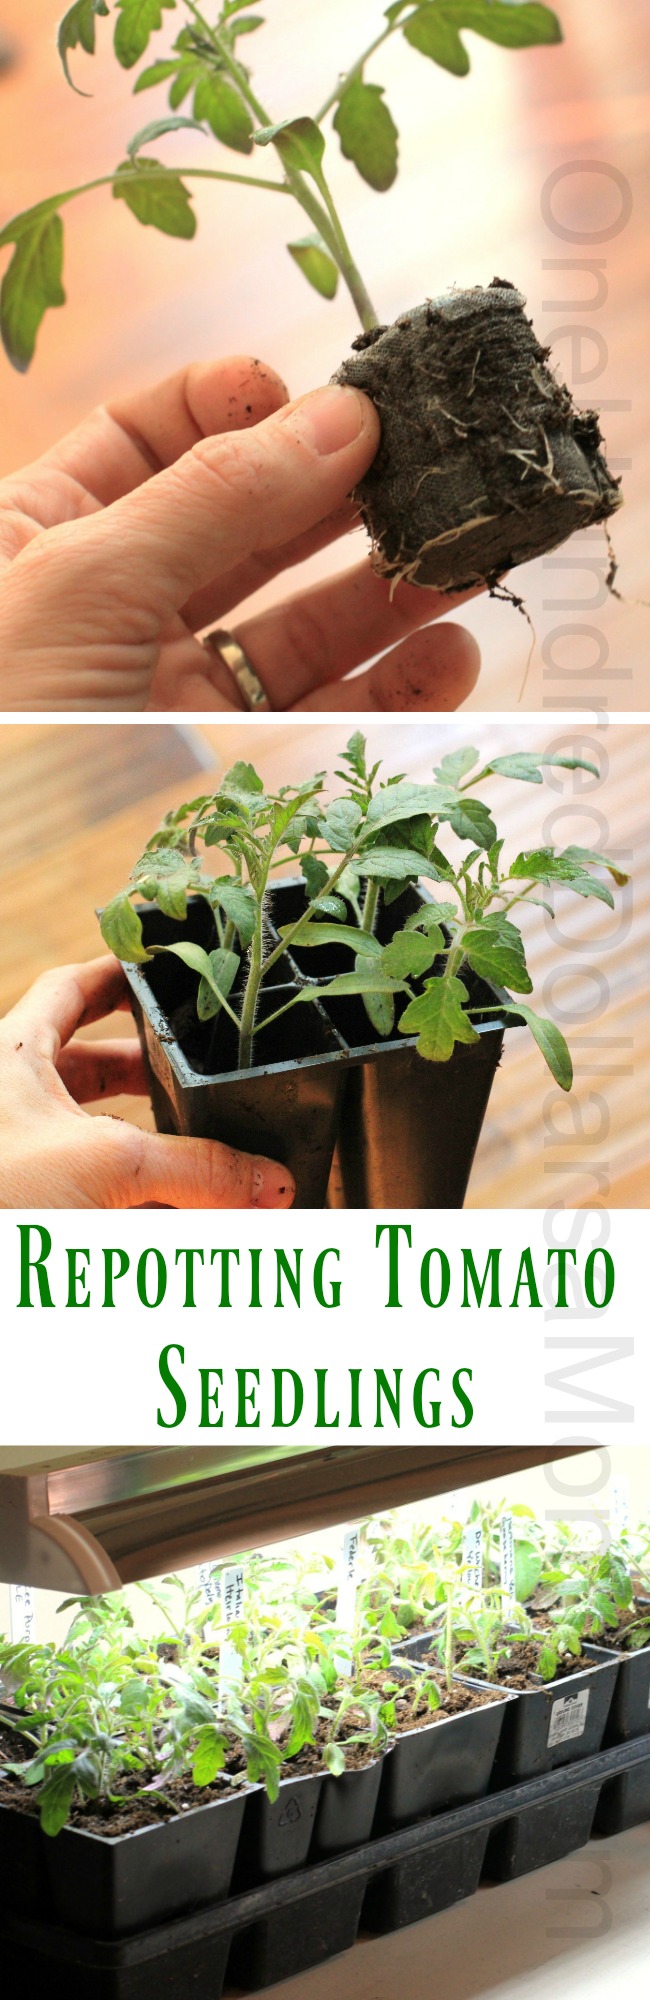 How to Grow Your Own Food: Repotting Tomato Seedlings